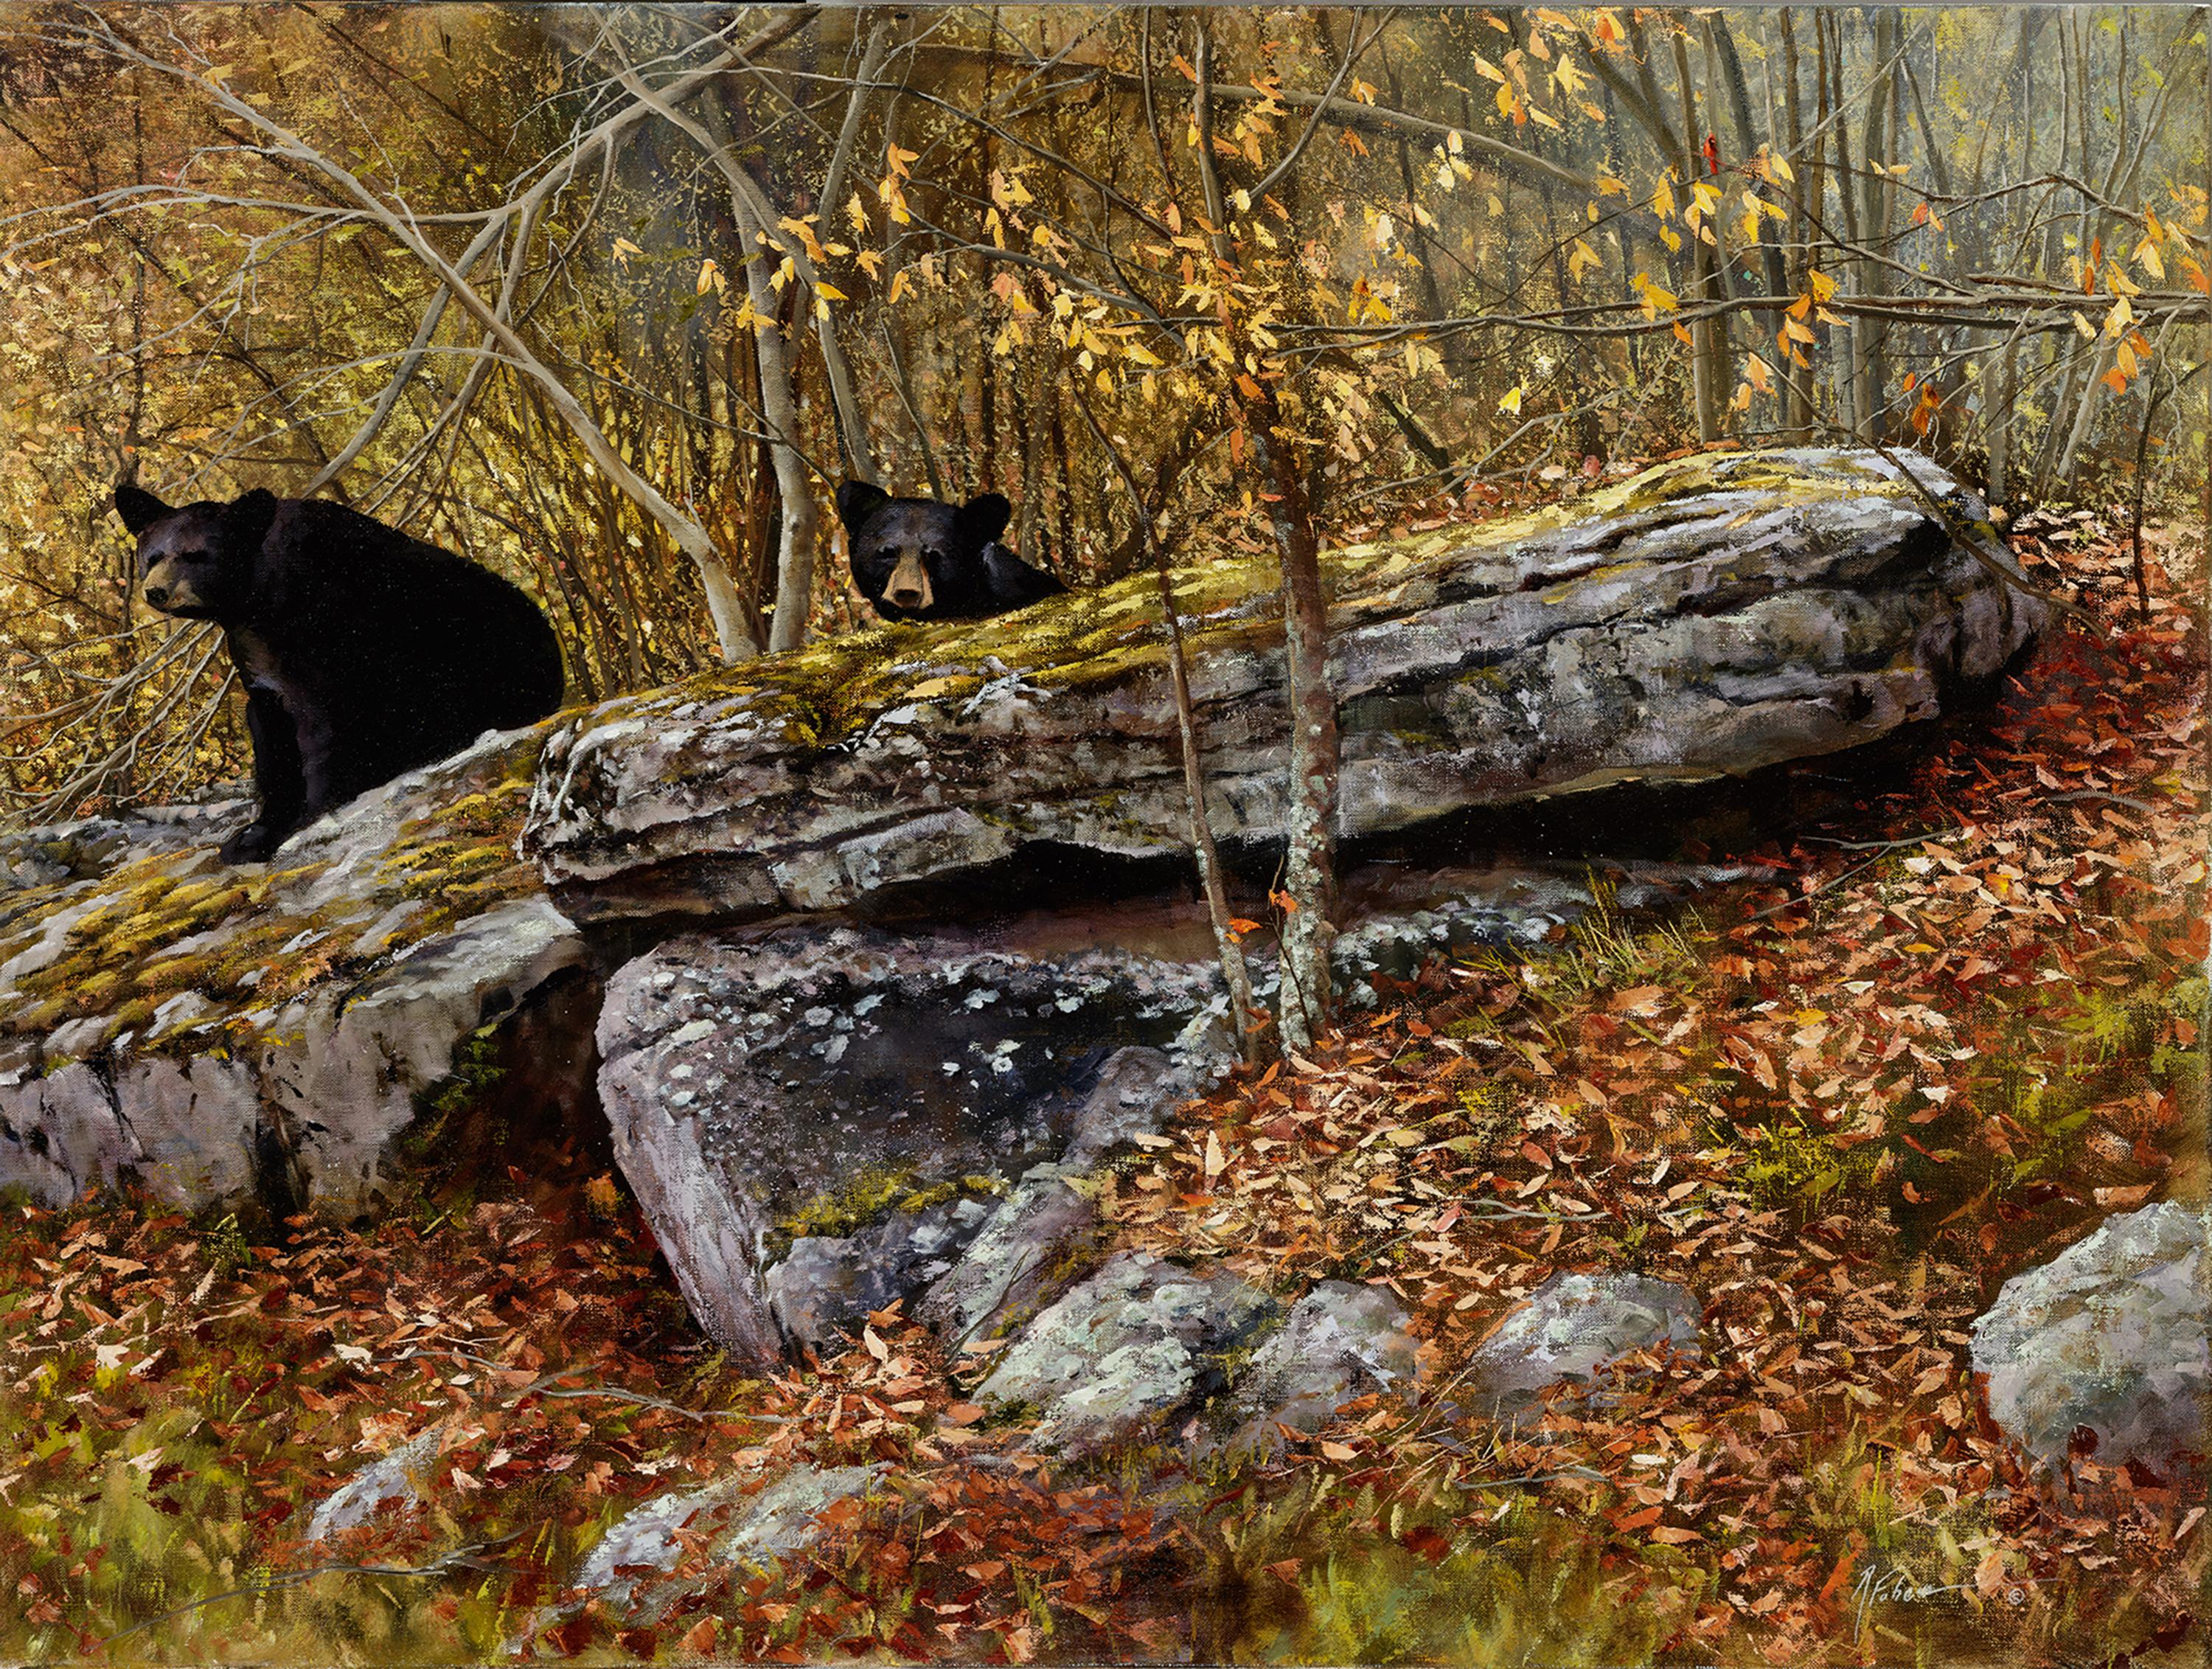 "Looking For Trouble" is an original oil on canvas and measures 36x48 inches. This realist painting is wildlife scene of of two young bears wandering through the forest. The cubs are climbing some rocks surrounded by the fallen autumn leaves.